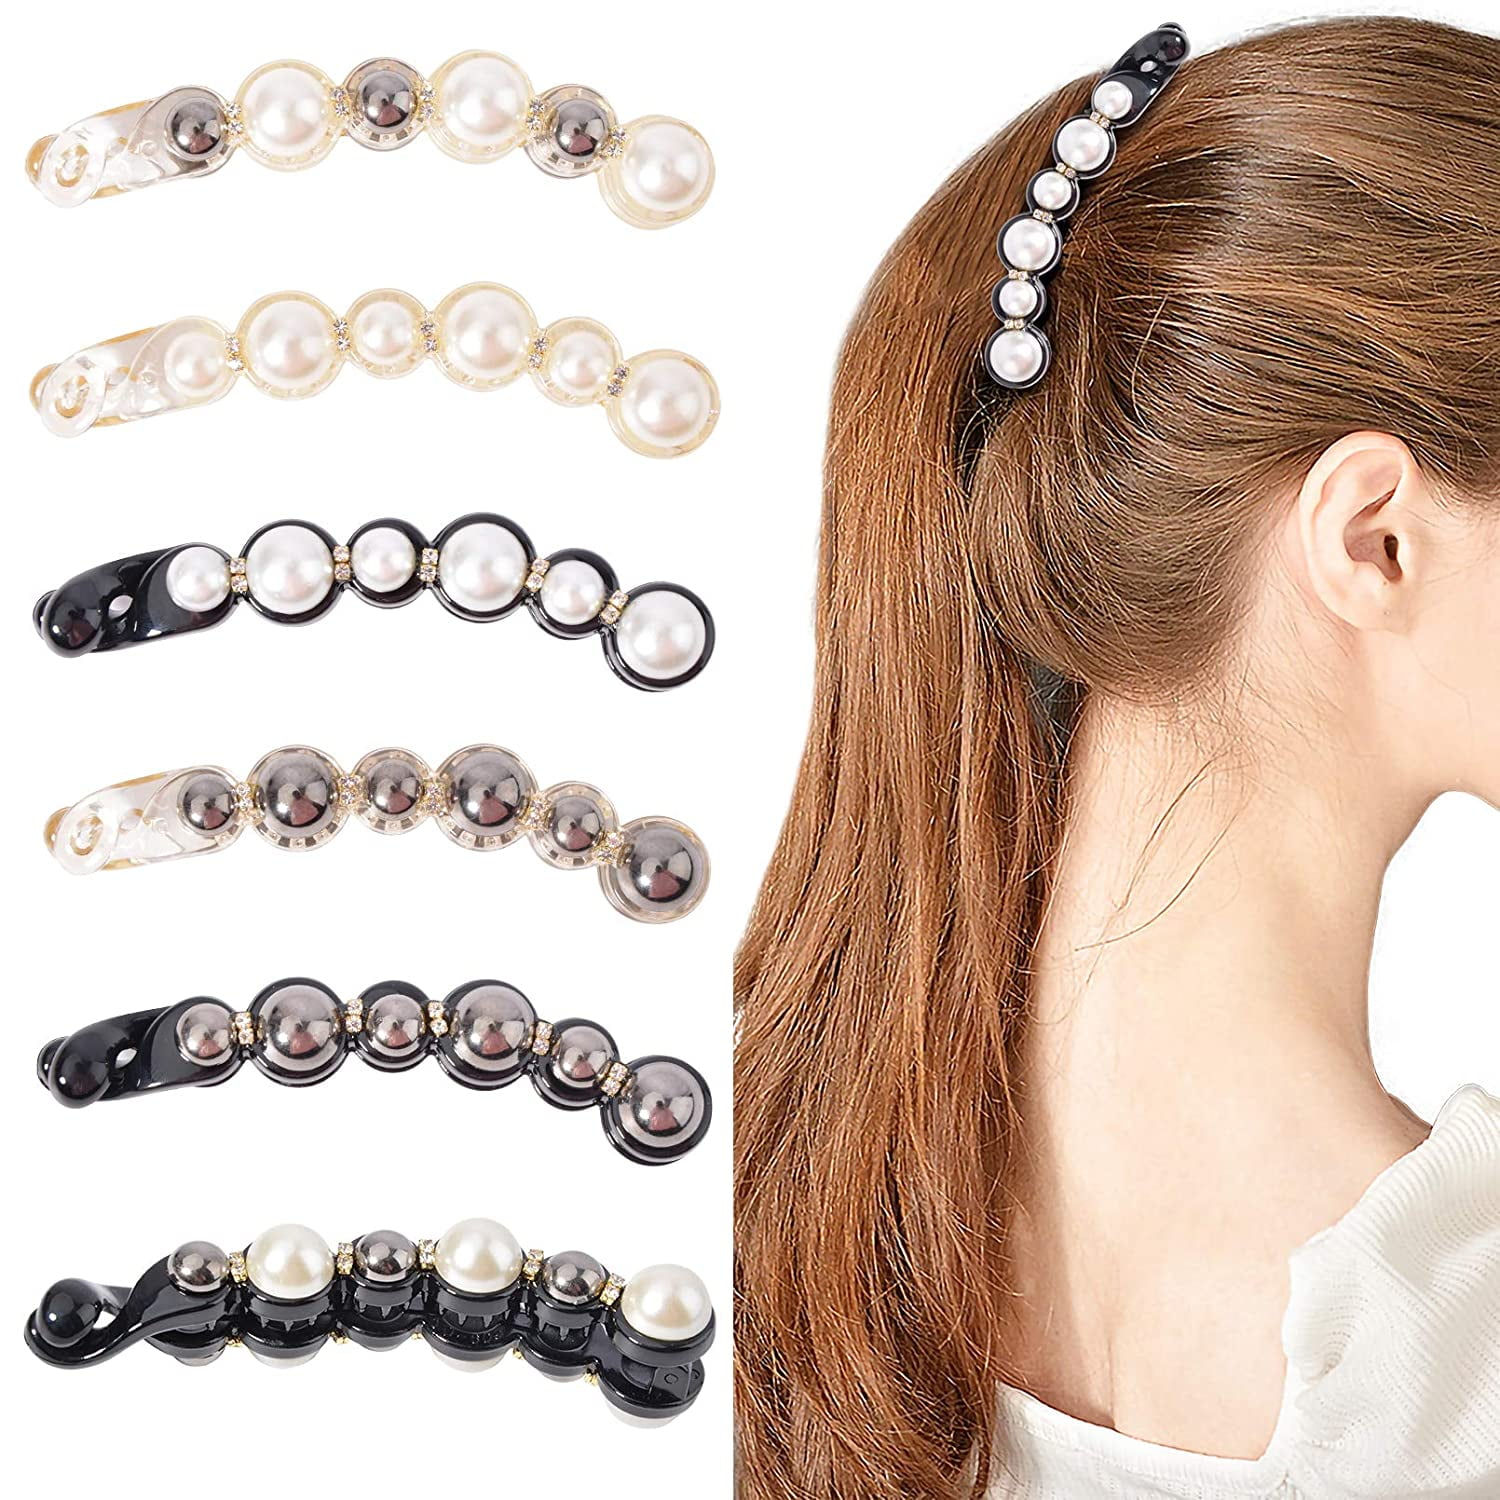 Women Hair Claw Clips Crystal Pearl Plastic Hairpin Barrette Hairband Accessory 